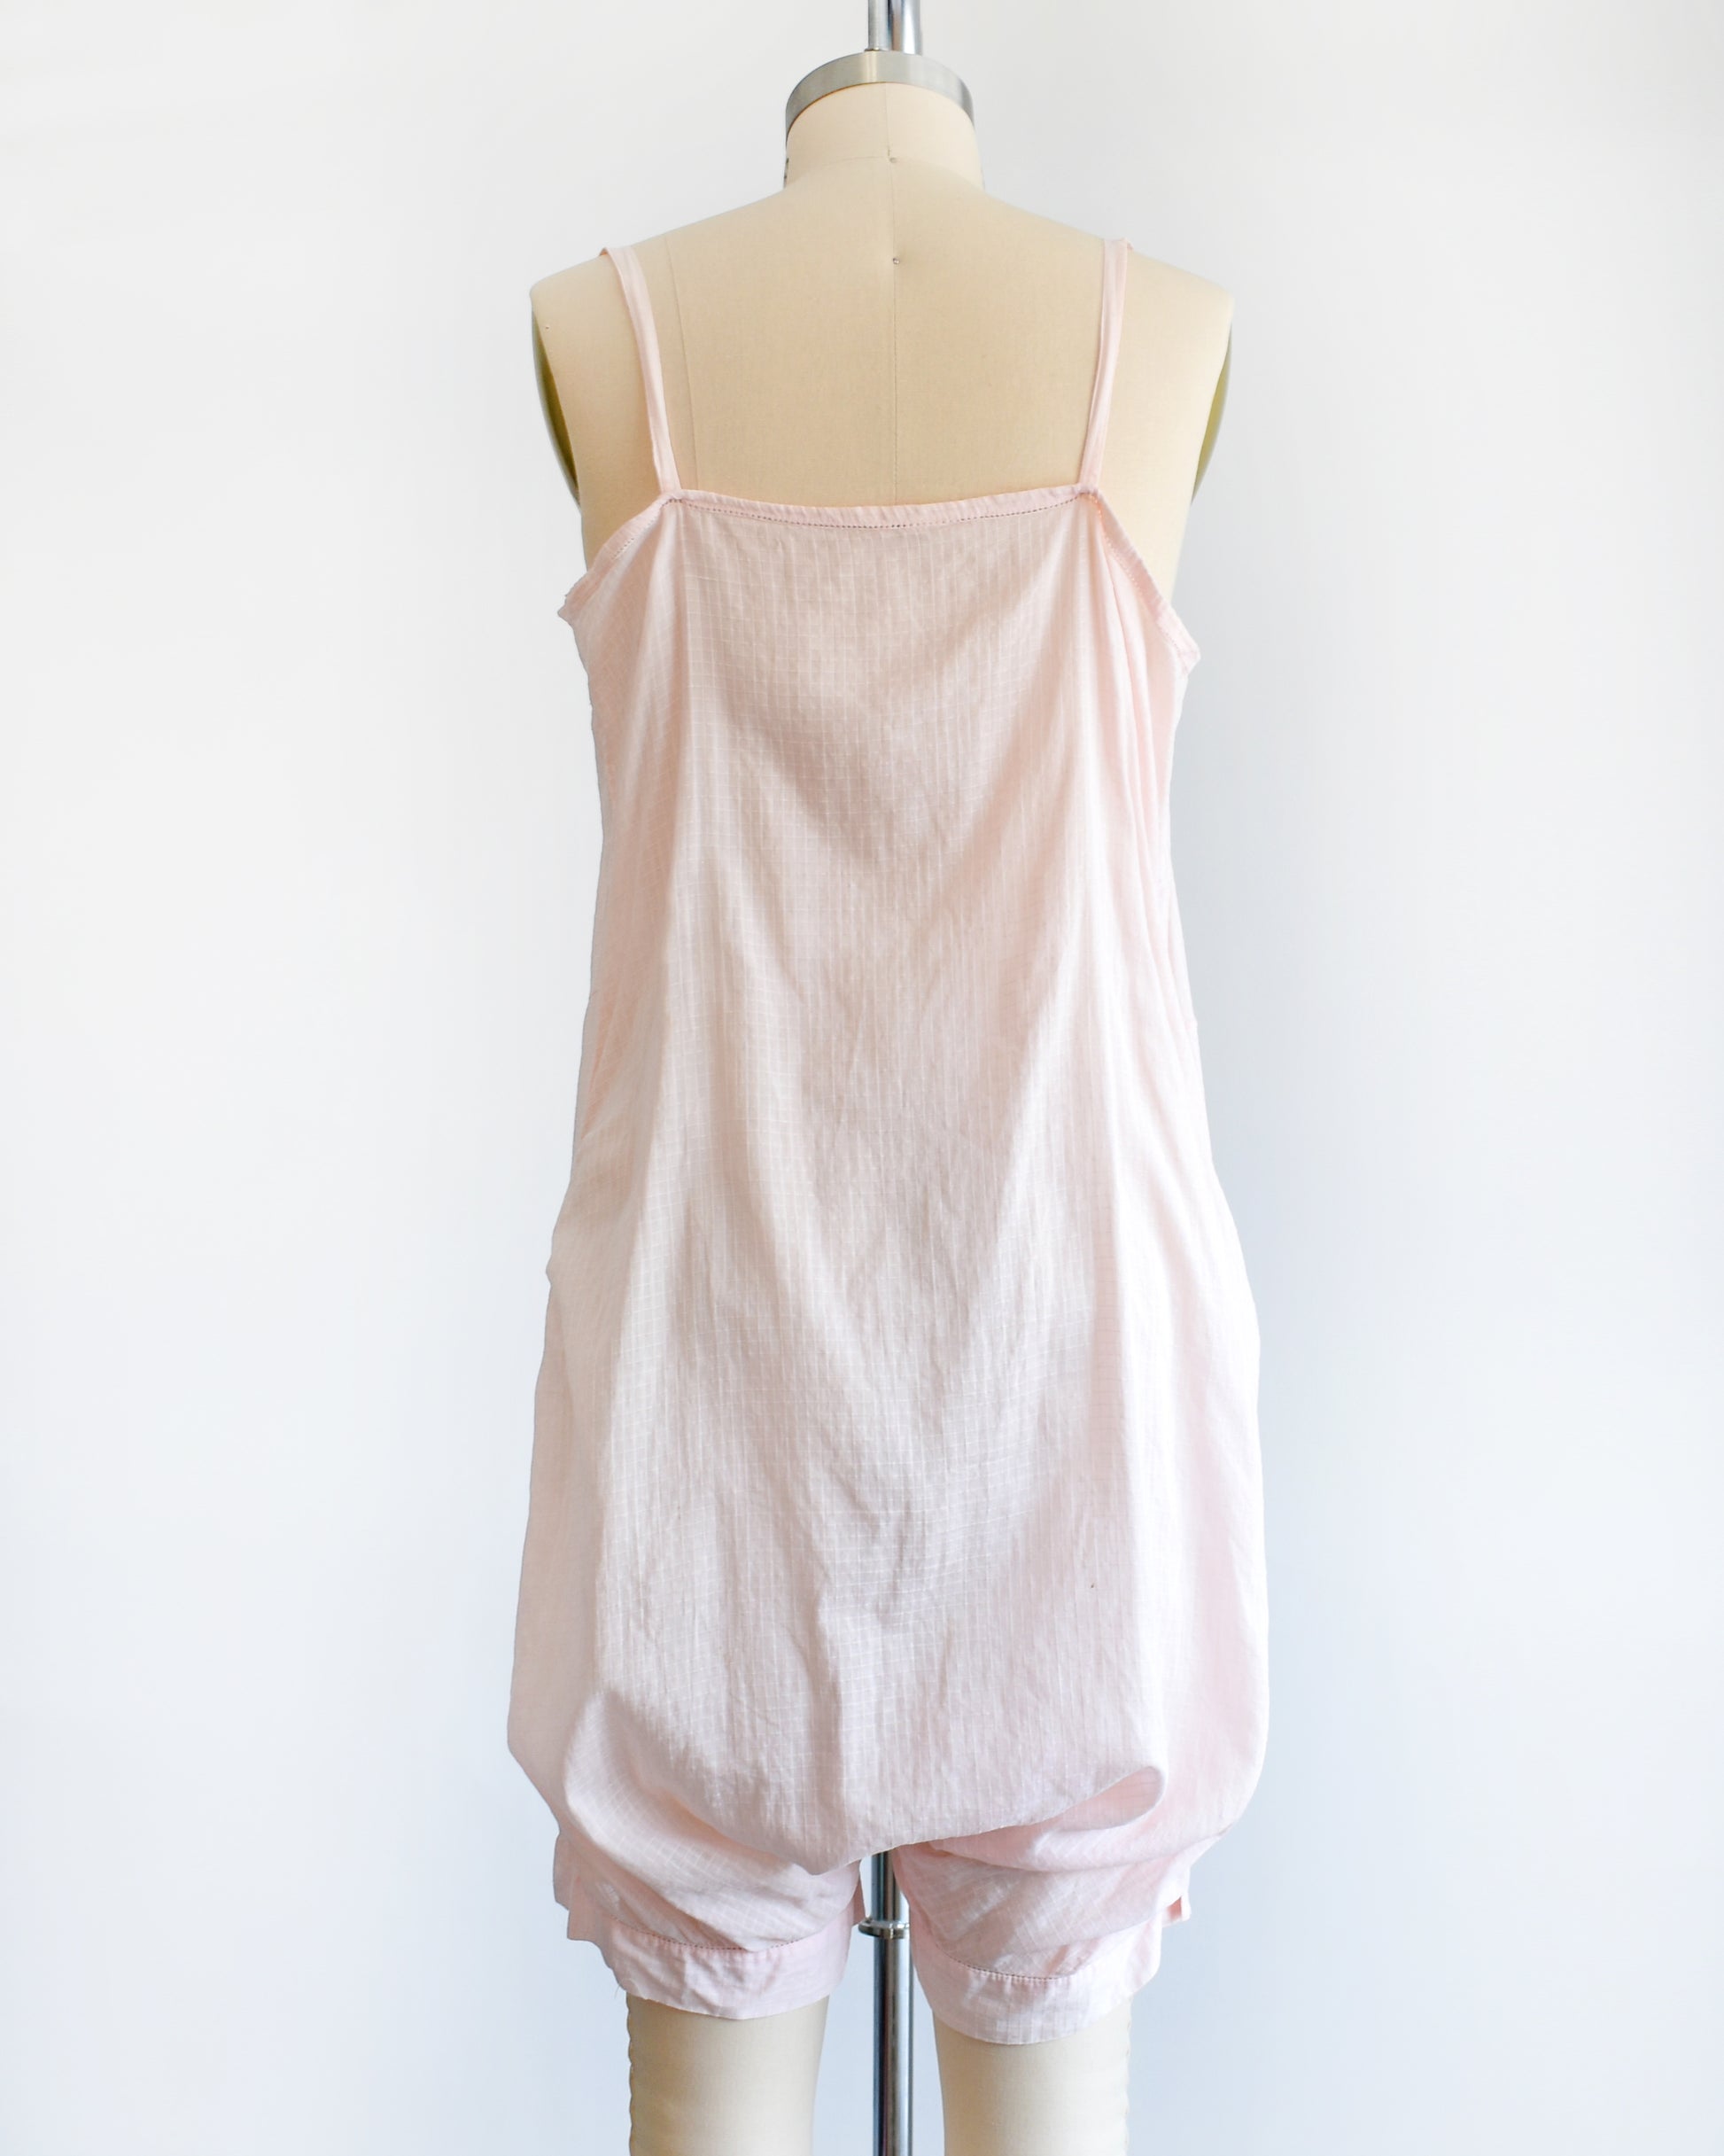 Back view of a vintage 1920s light pink chemise step in, which has spaghetti straps, square neckline, and snap buttons on the right side. The garment is on a dress form.